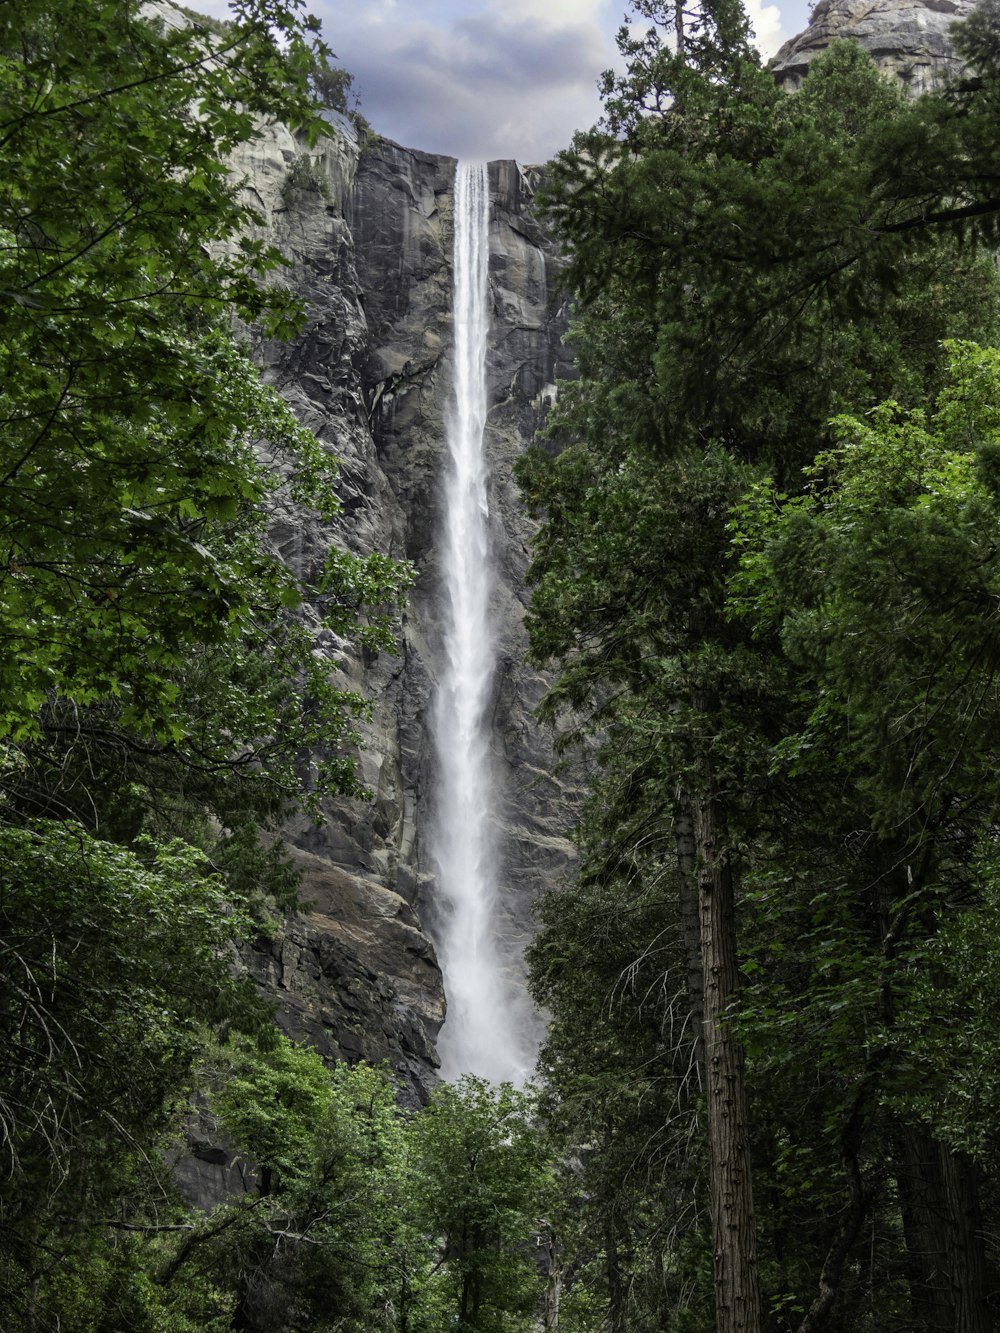 a tall waterfall towering over a lush green forest